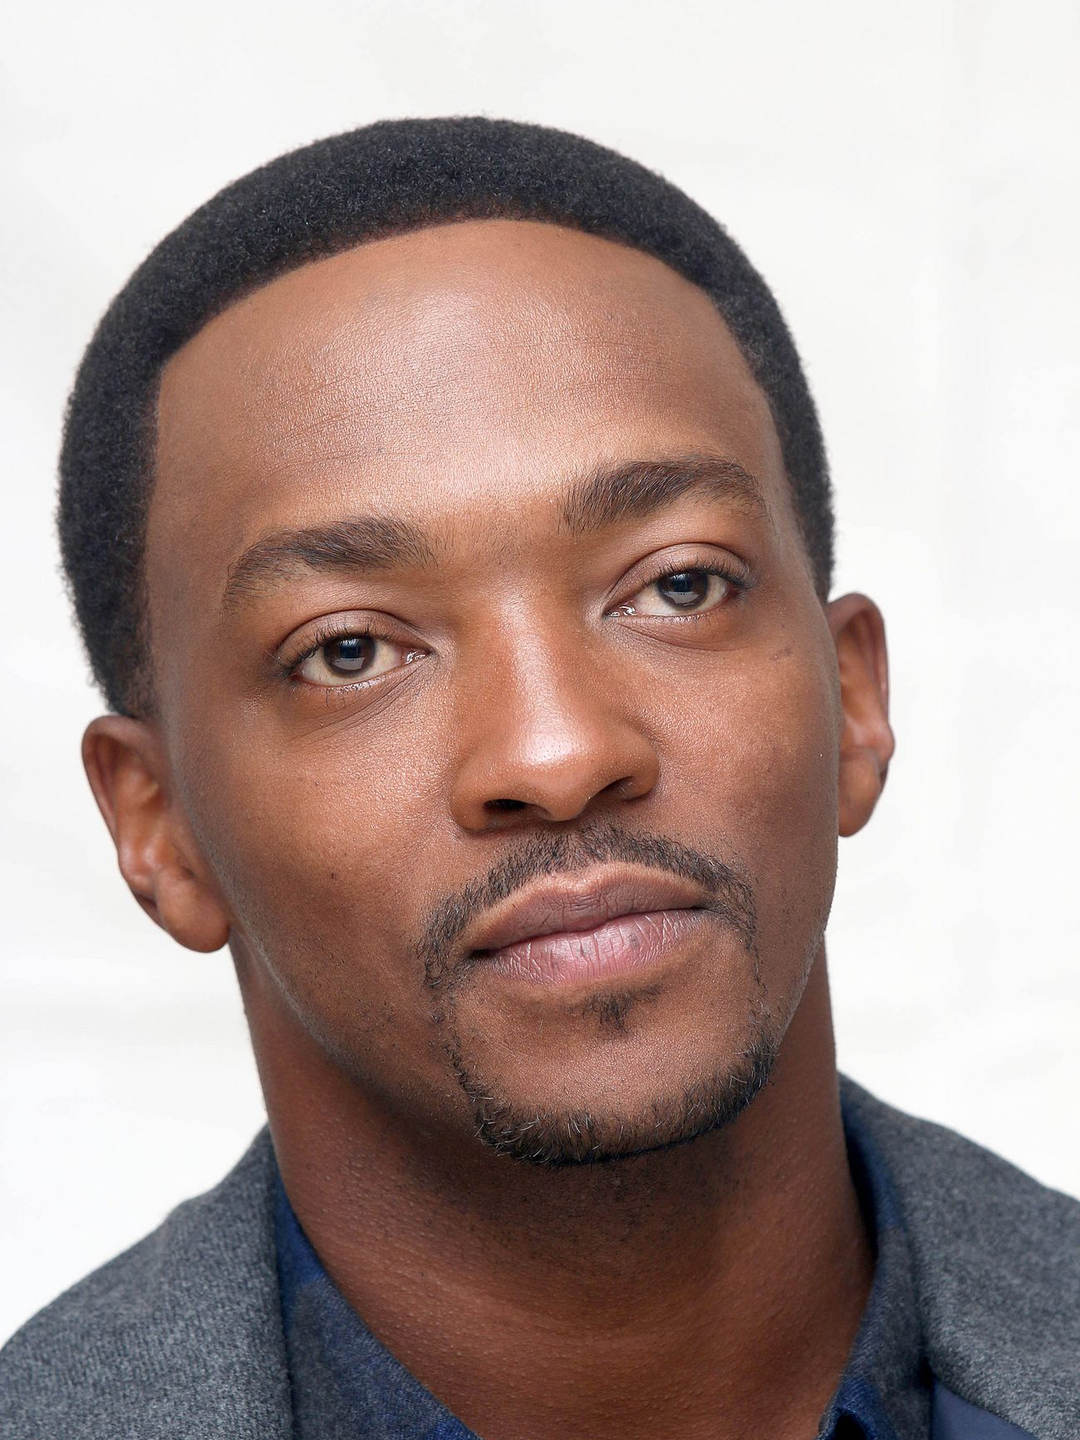 Anthony Mackie who is his father